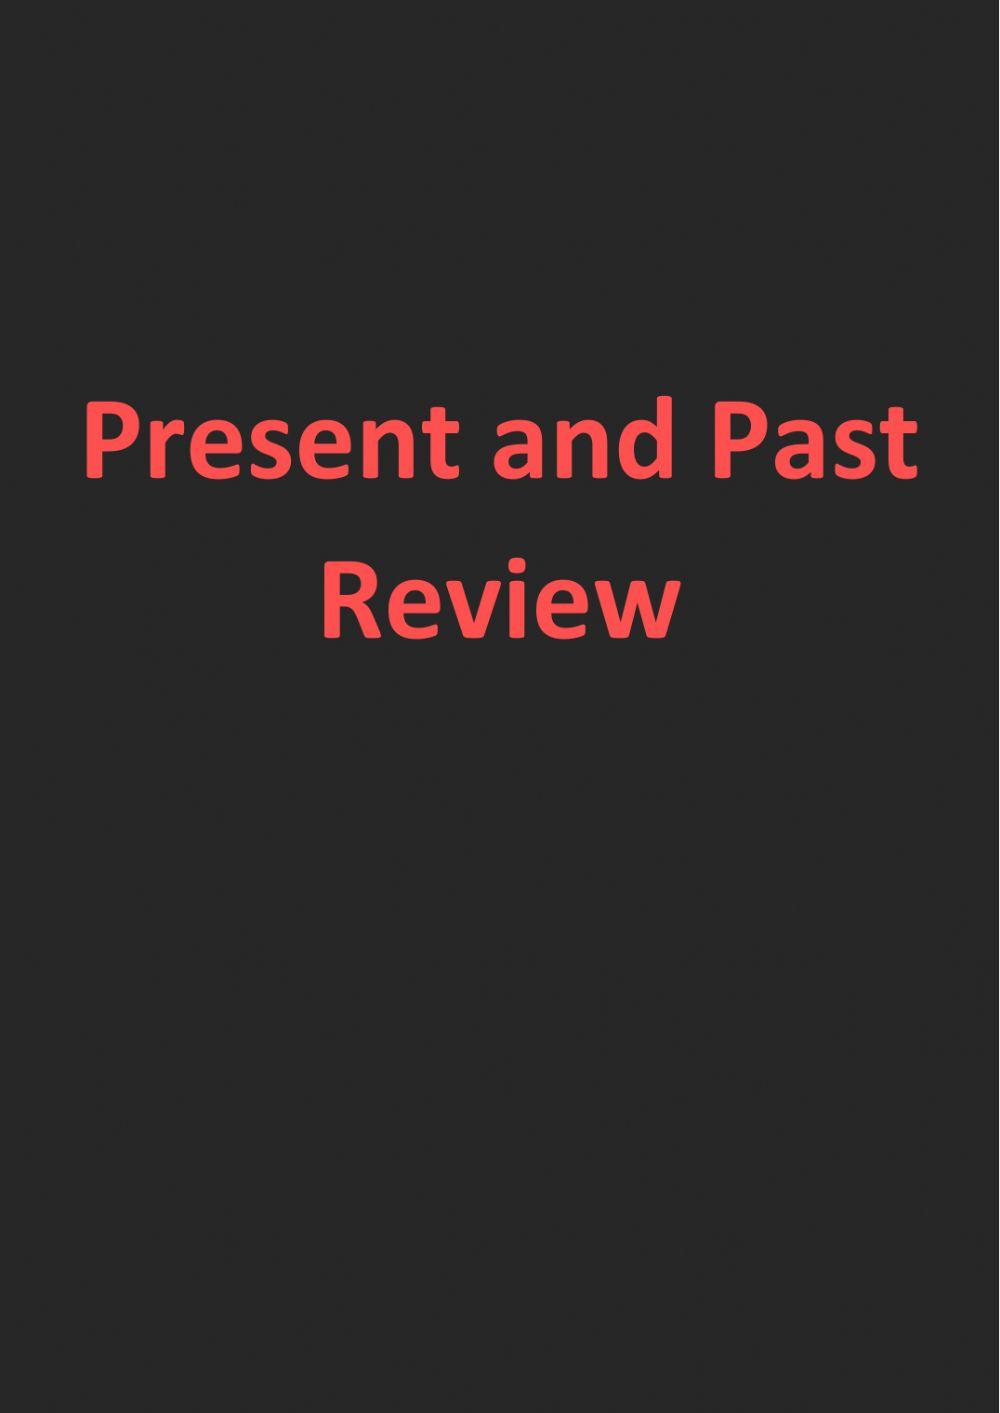 Present and past review bookmark